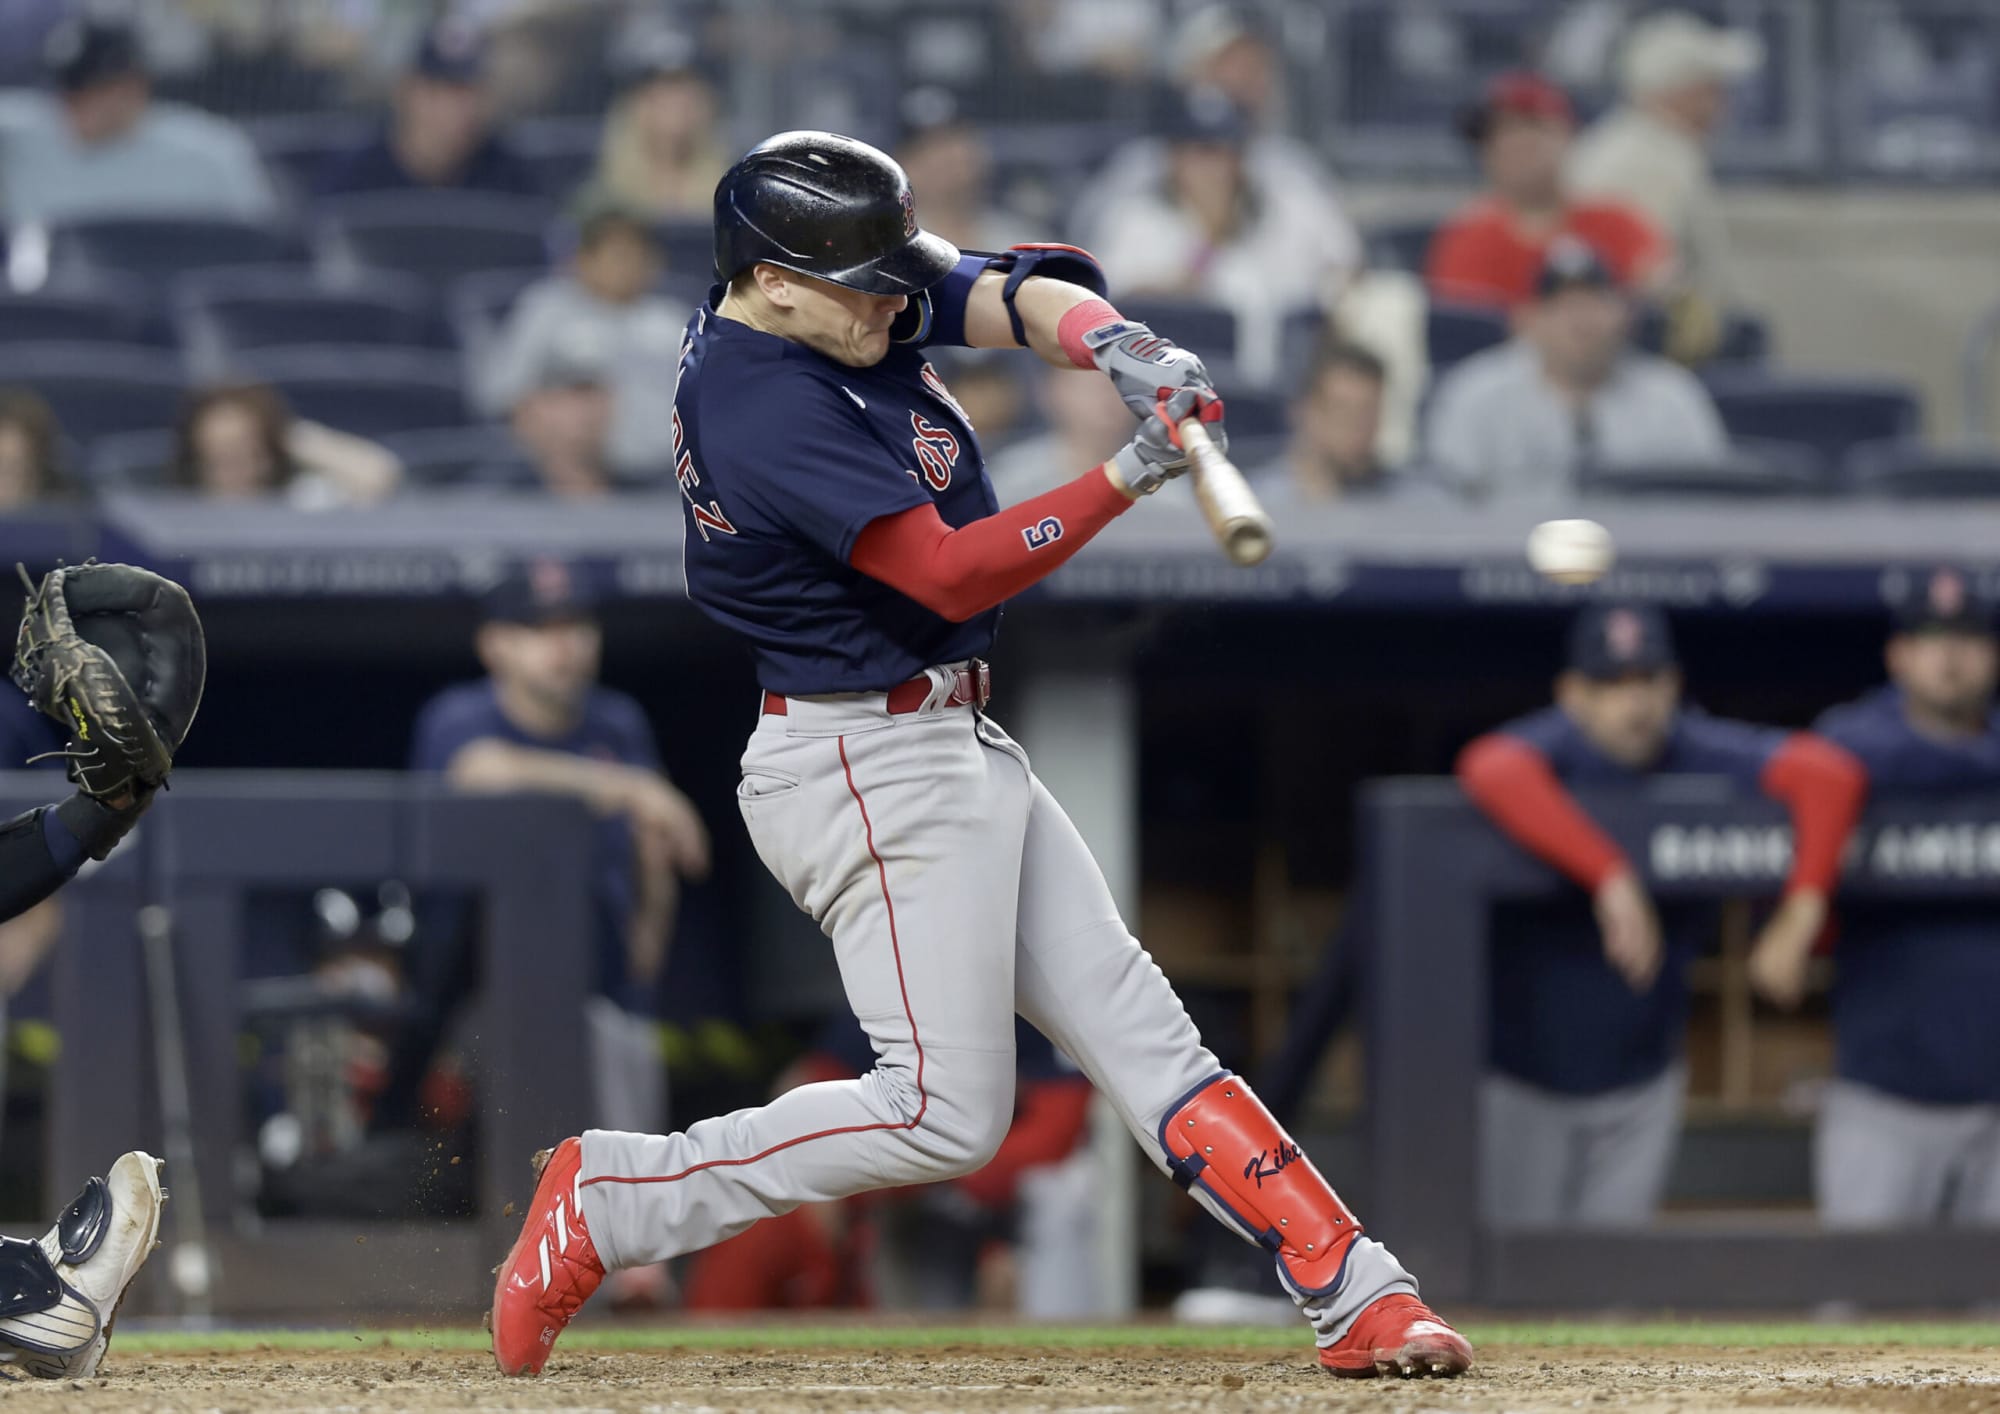 Red Sox shortstop Kiké Hernández: I need to be better